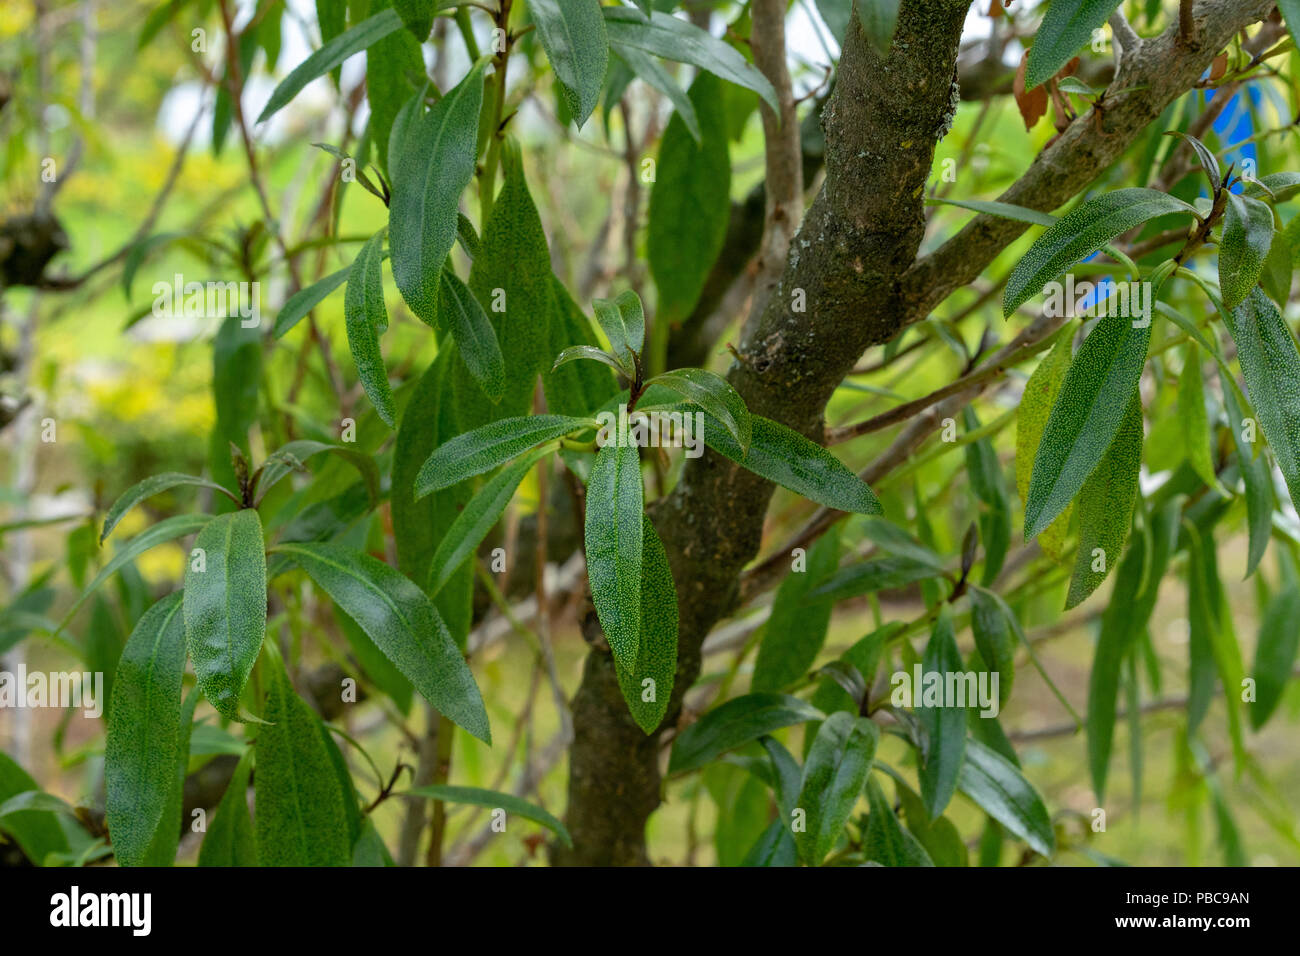 green leaves and branches of myoporaceae tree Stock Photo